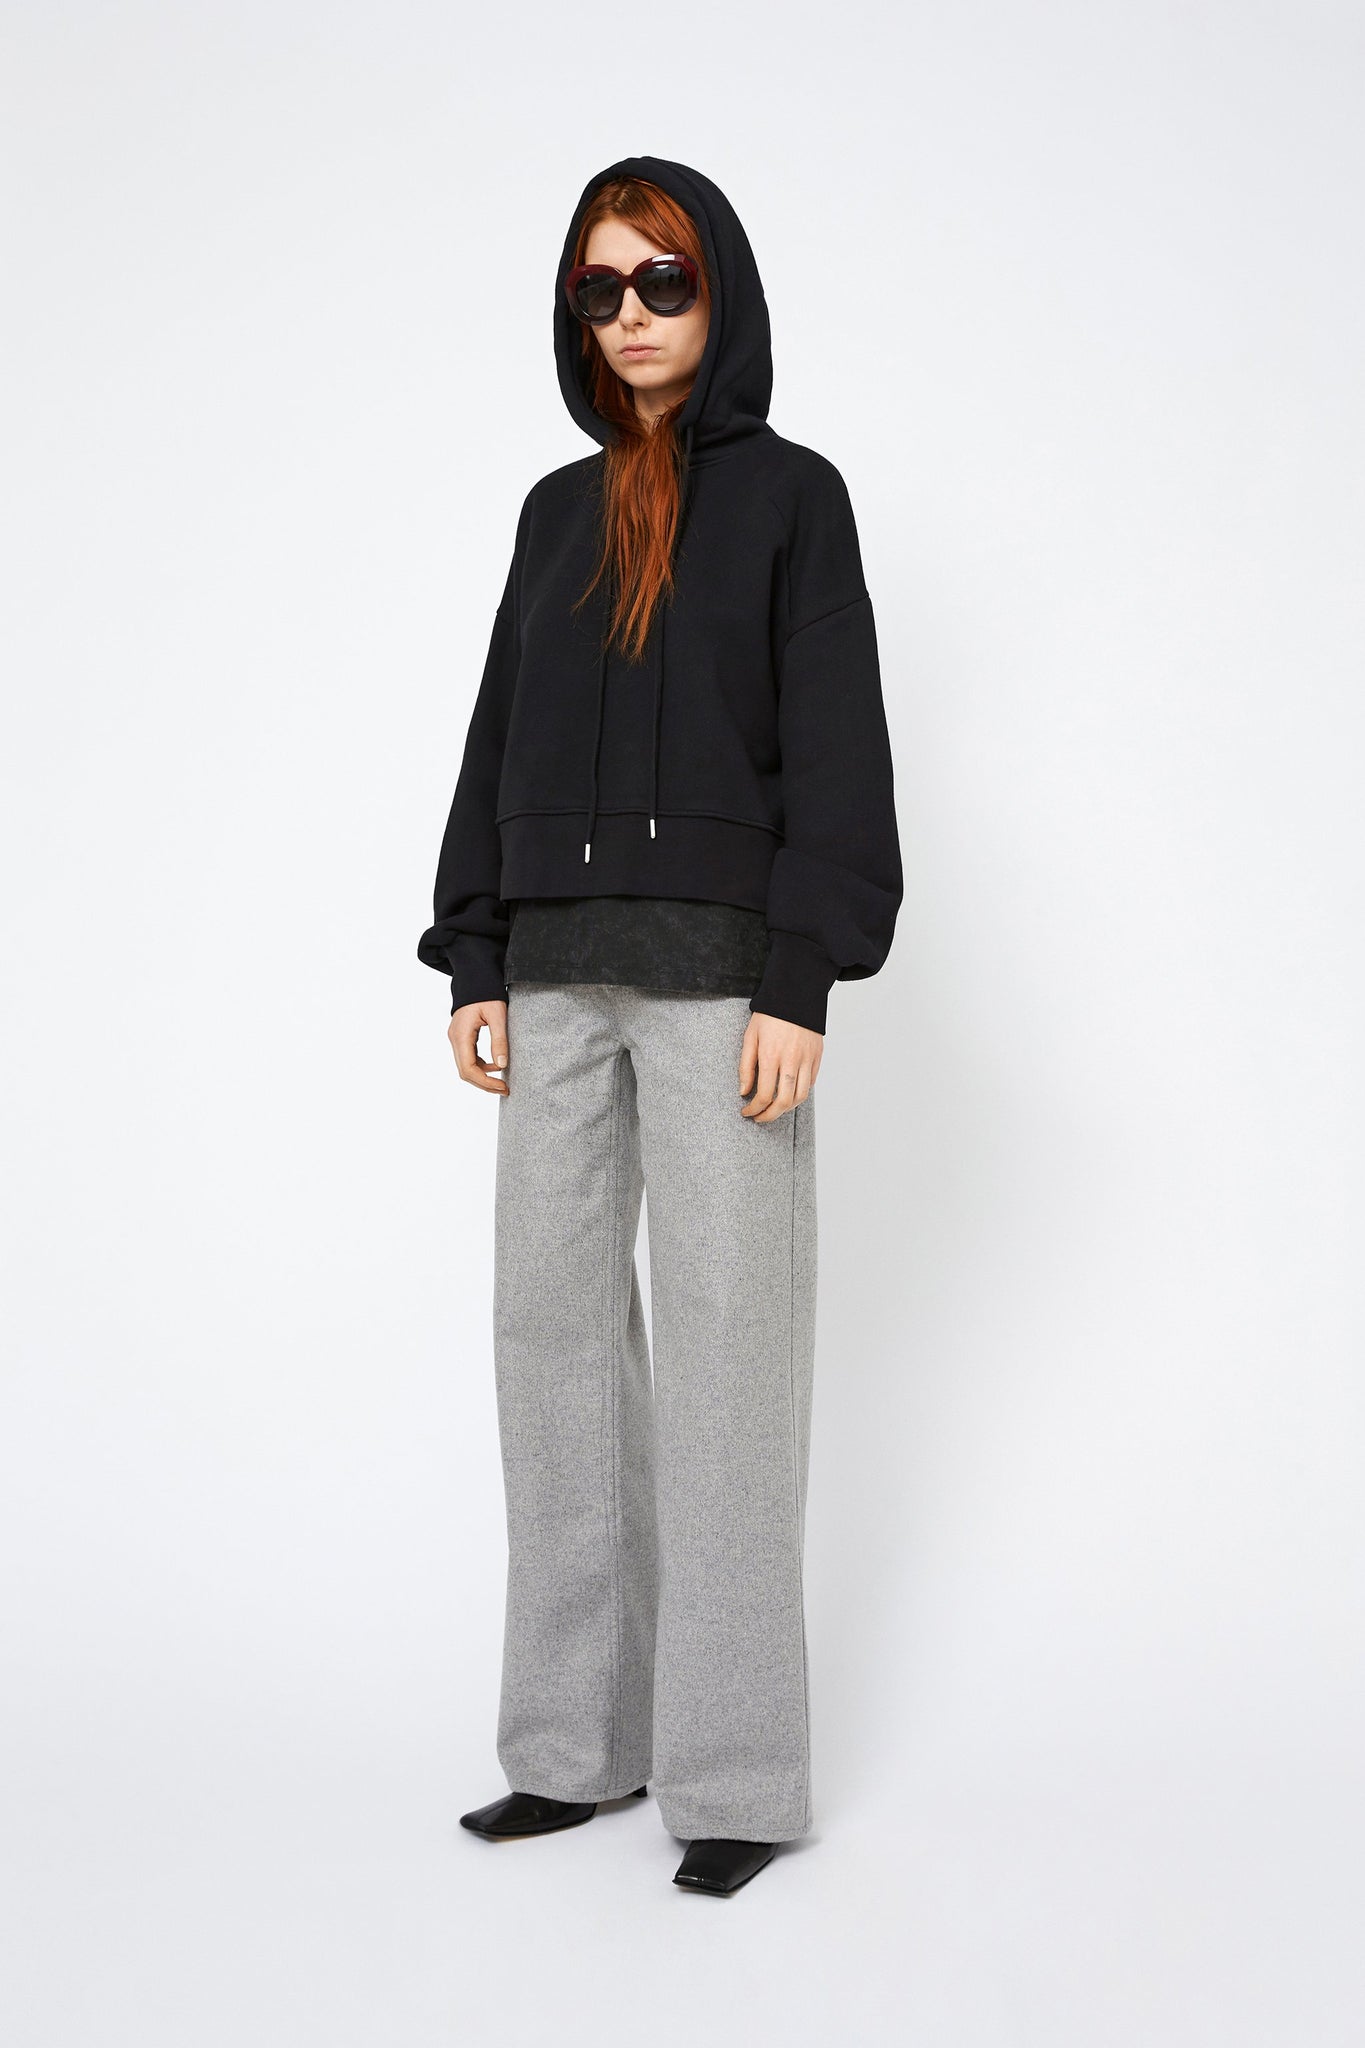 SHORT OVERSIZED HOODIE BY WON HUNDRED IN BLACK